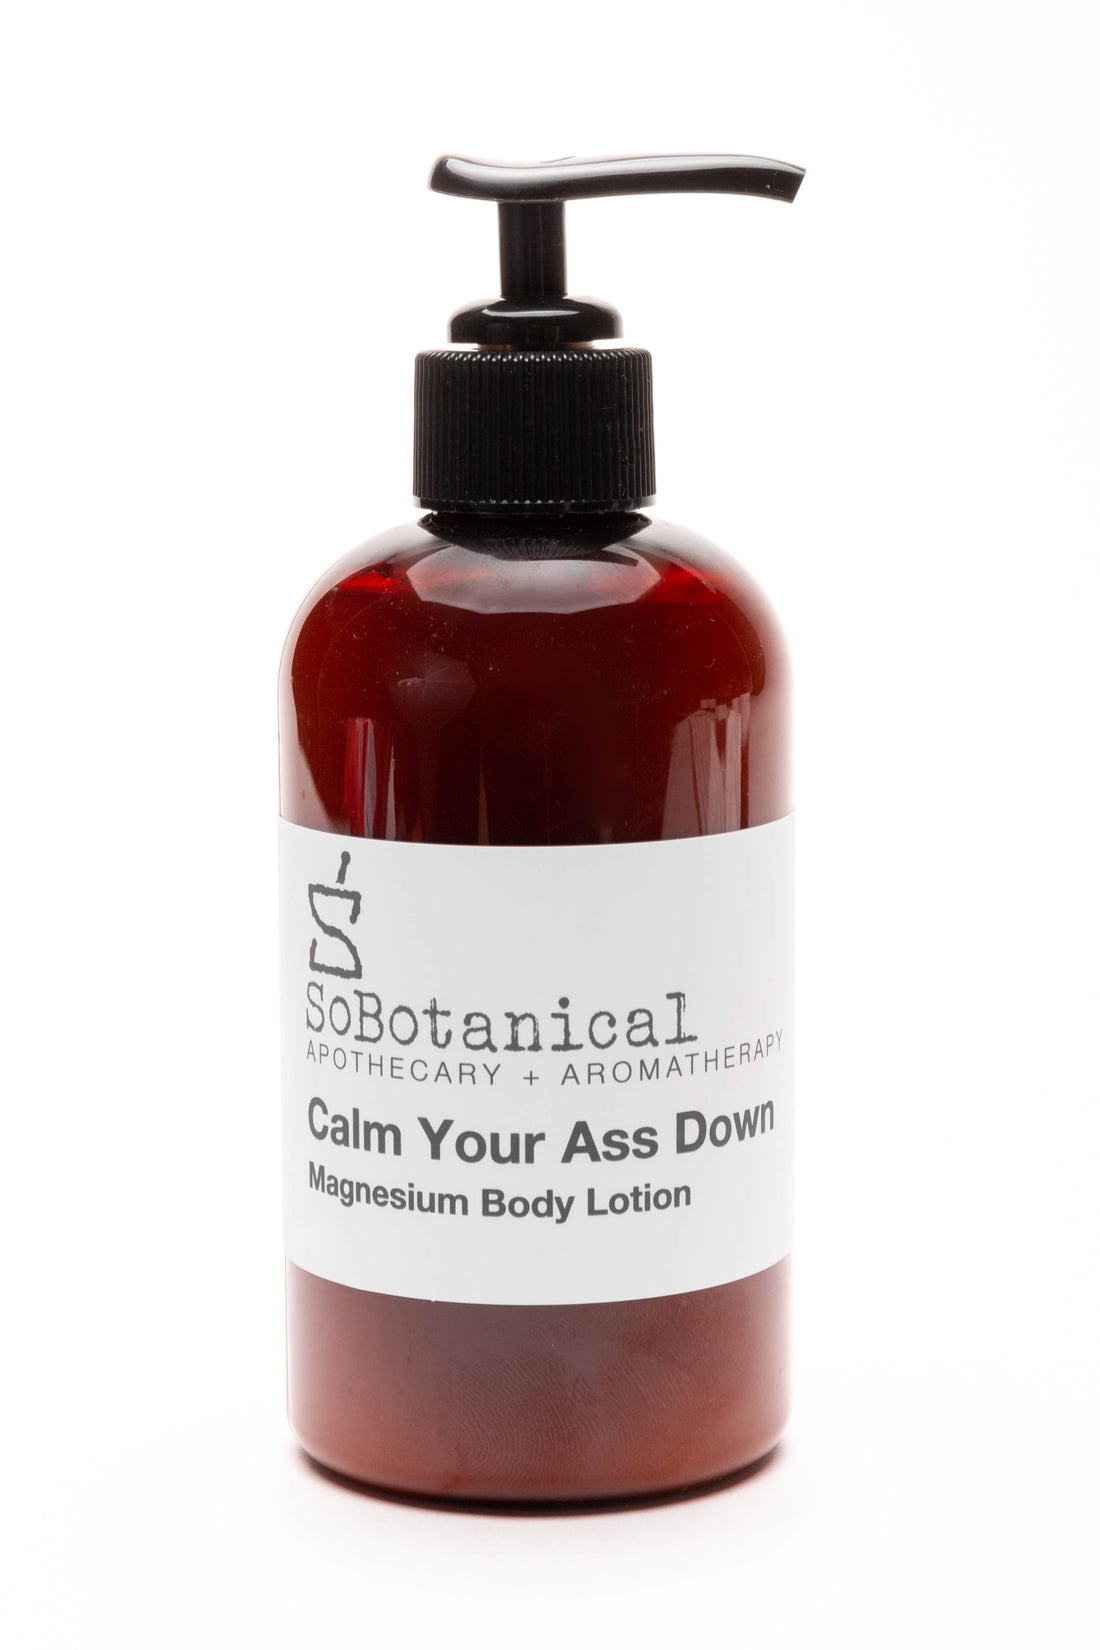 Calm Your A** Down Magnesium Body Lotion